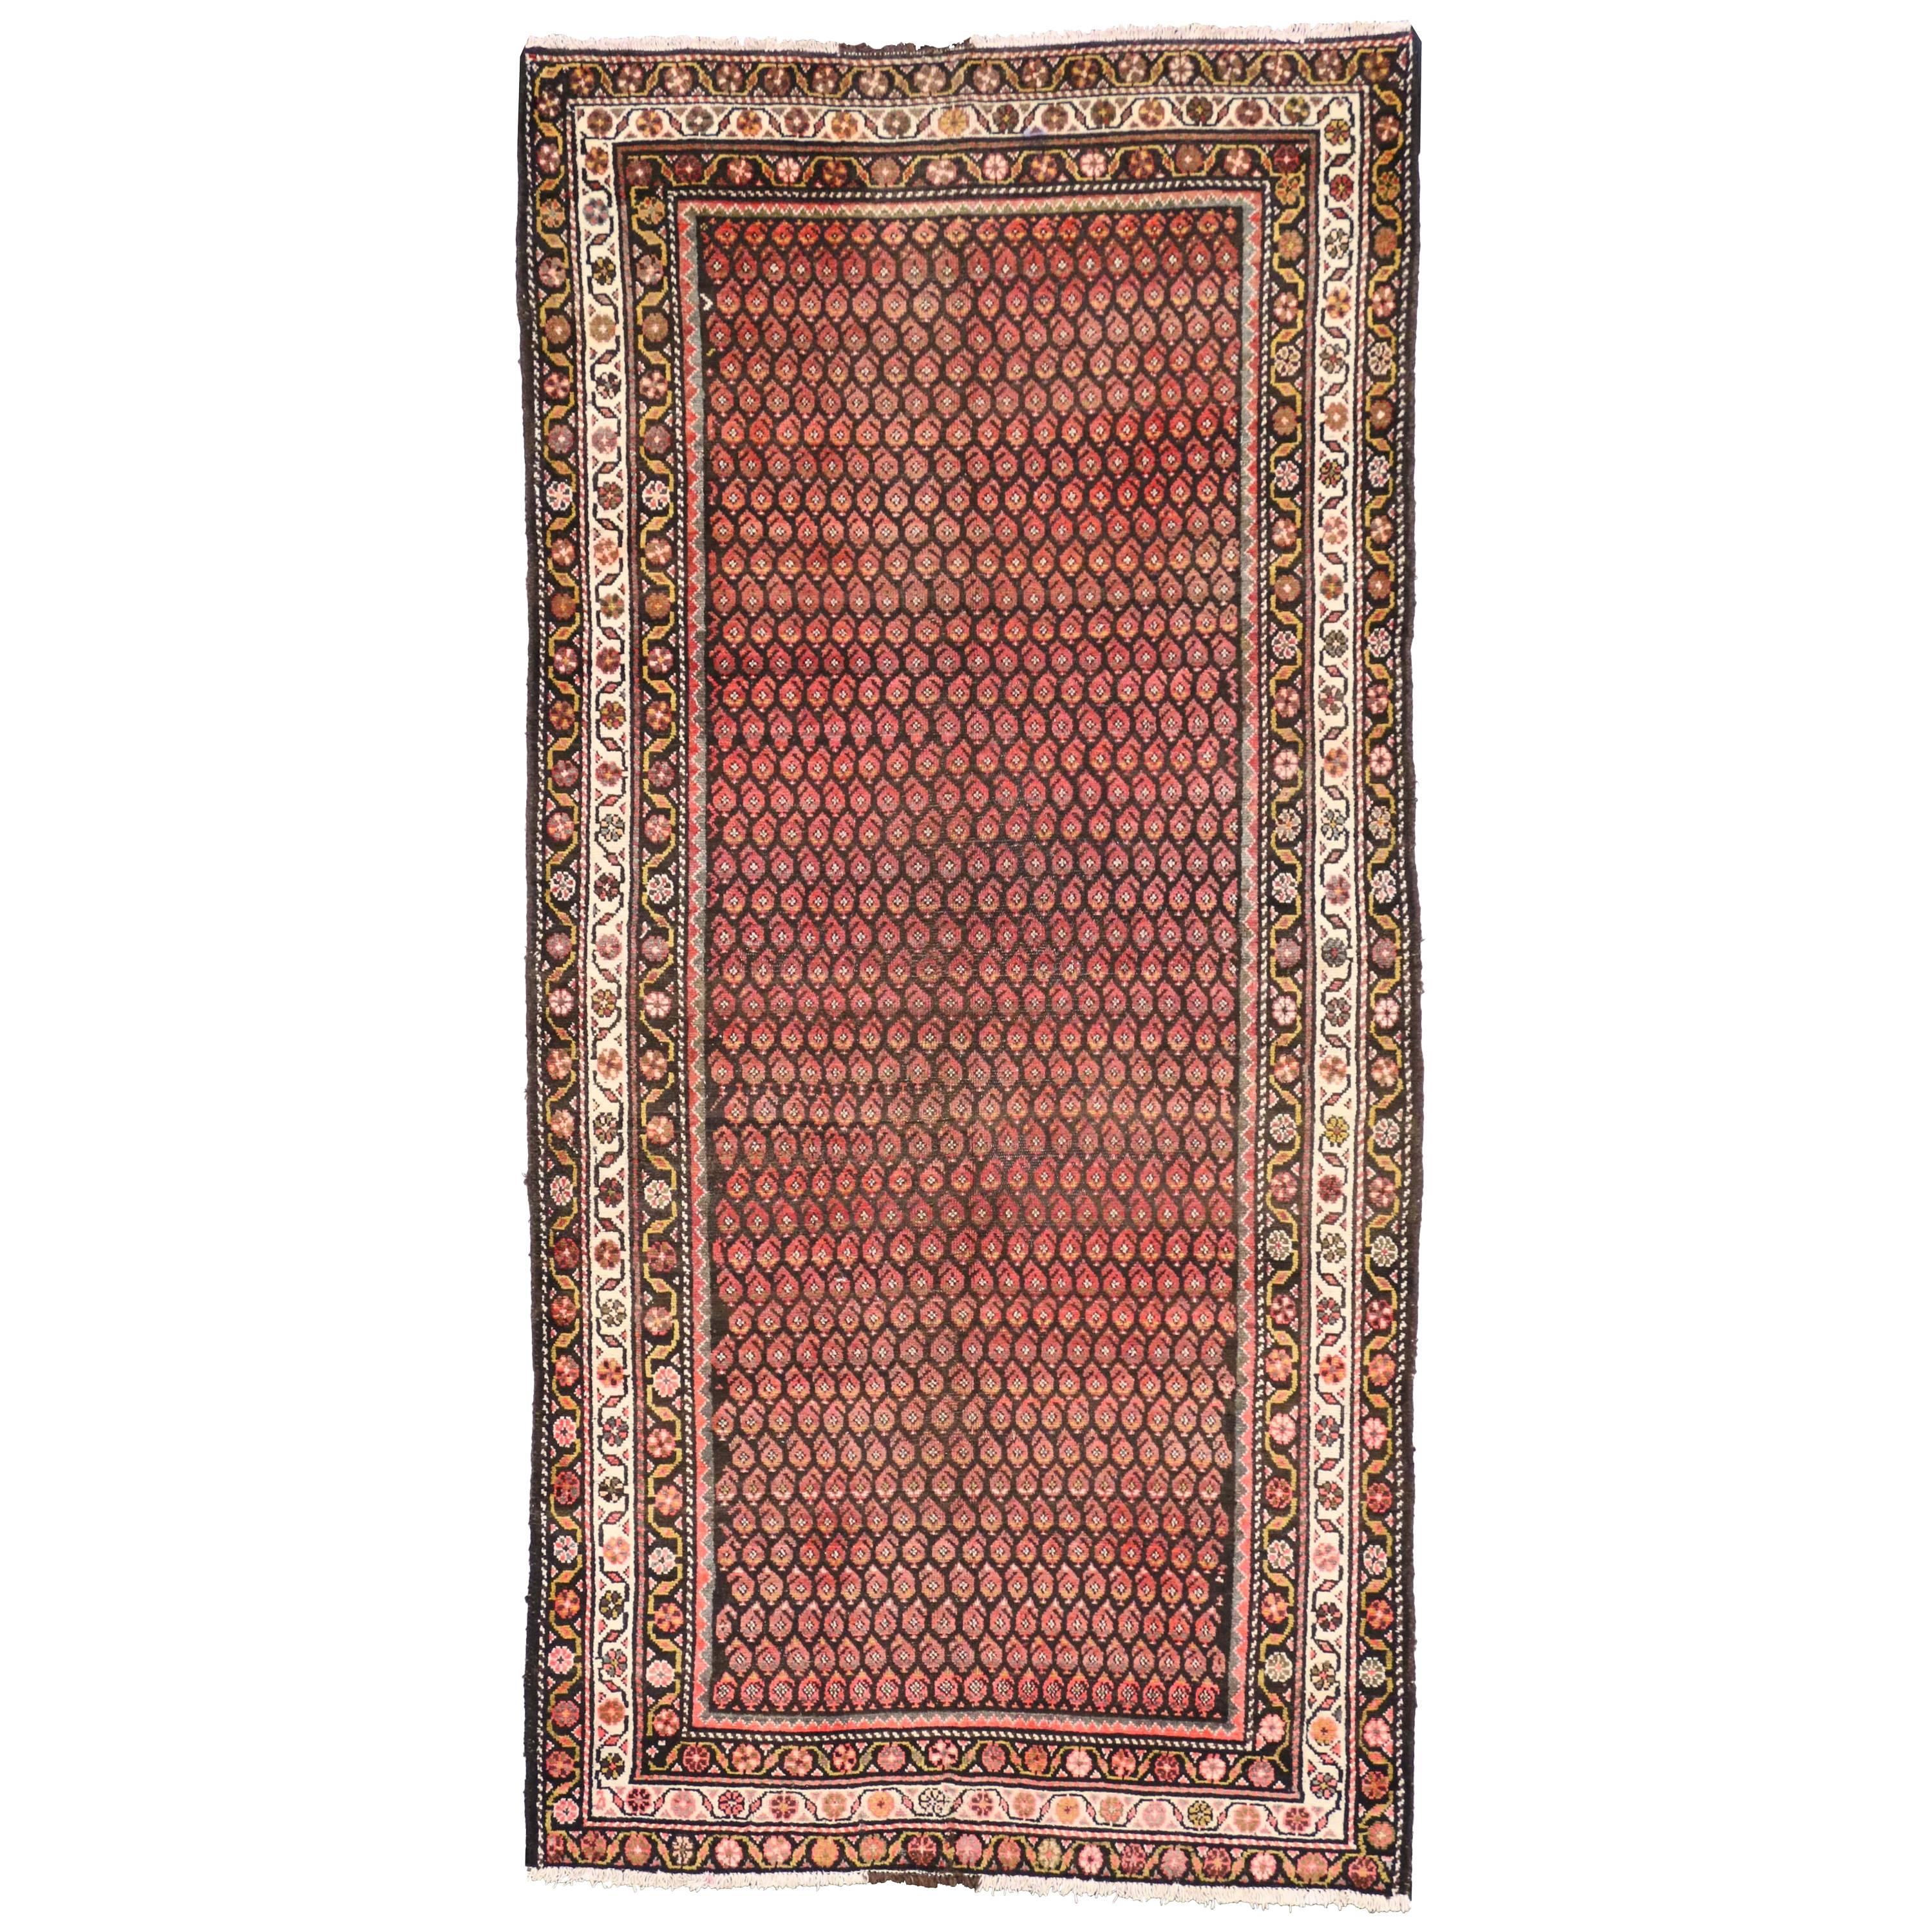 Vintage Persian Malayer Runner with Allover Boteh Design, Wide Hallway Runner